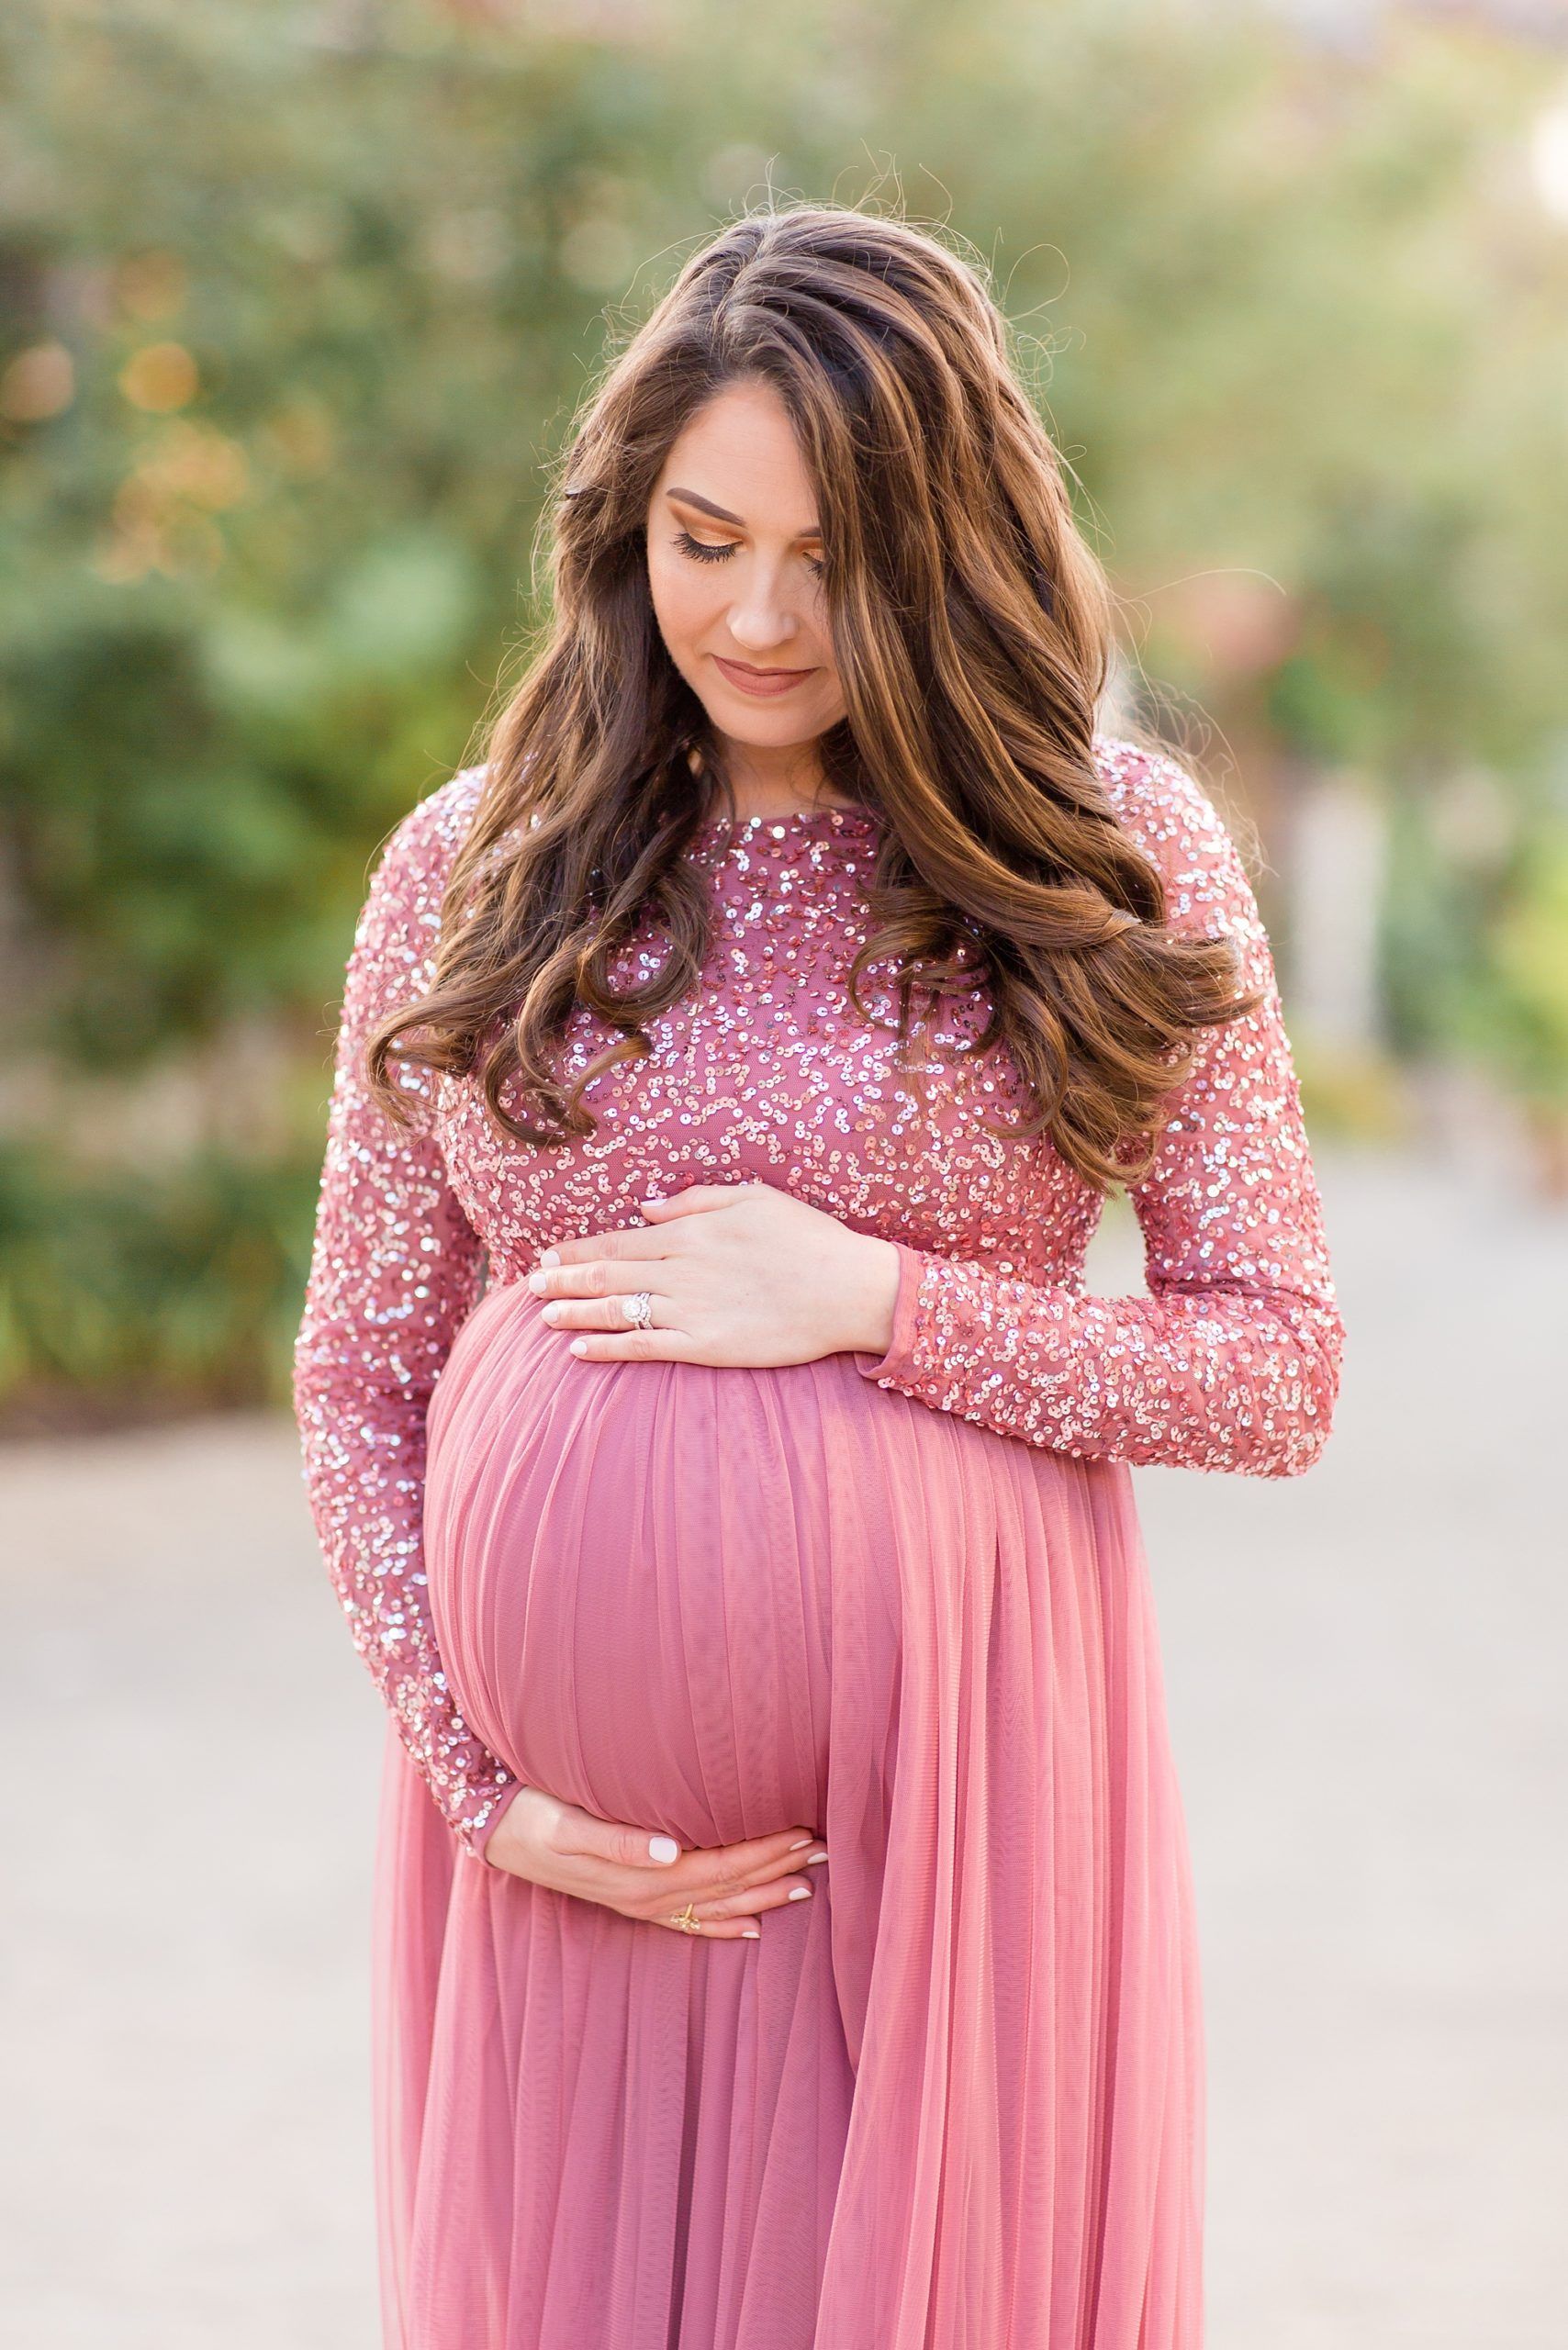 Look stylish while attending a party with
maternity gowns